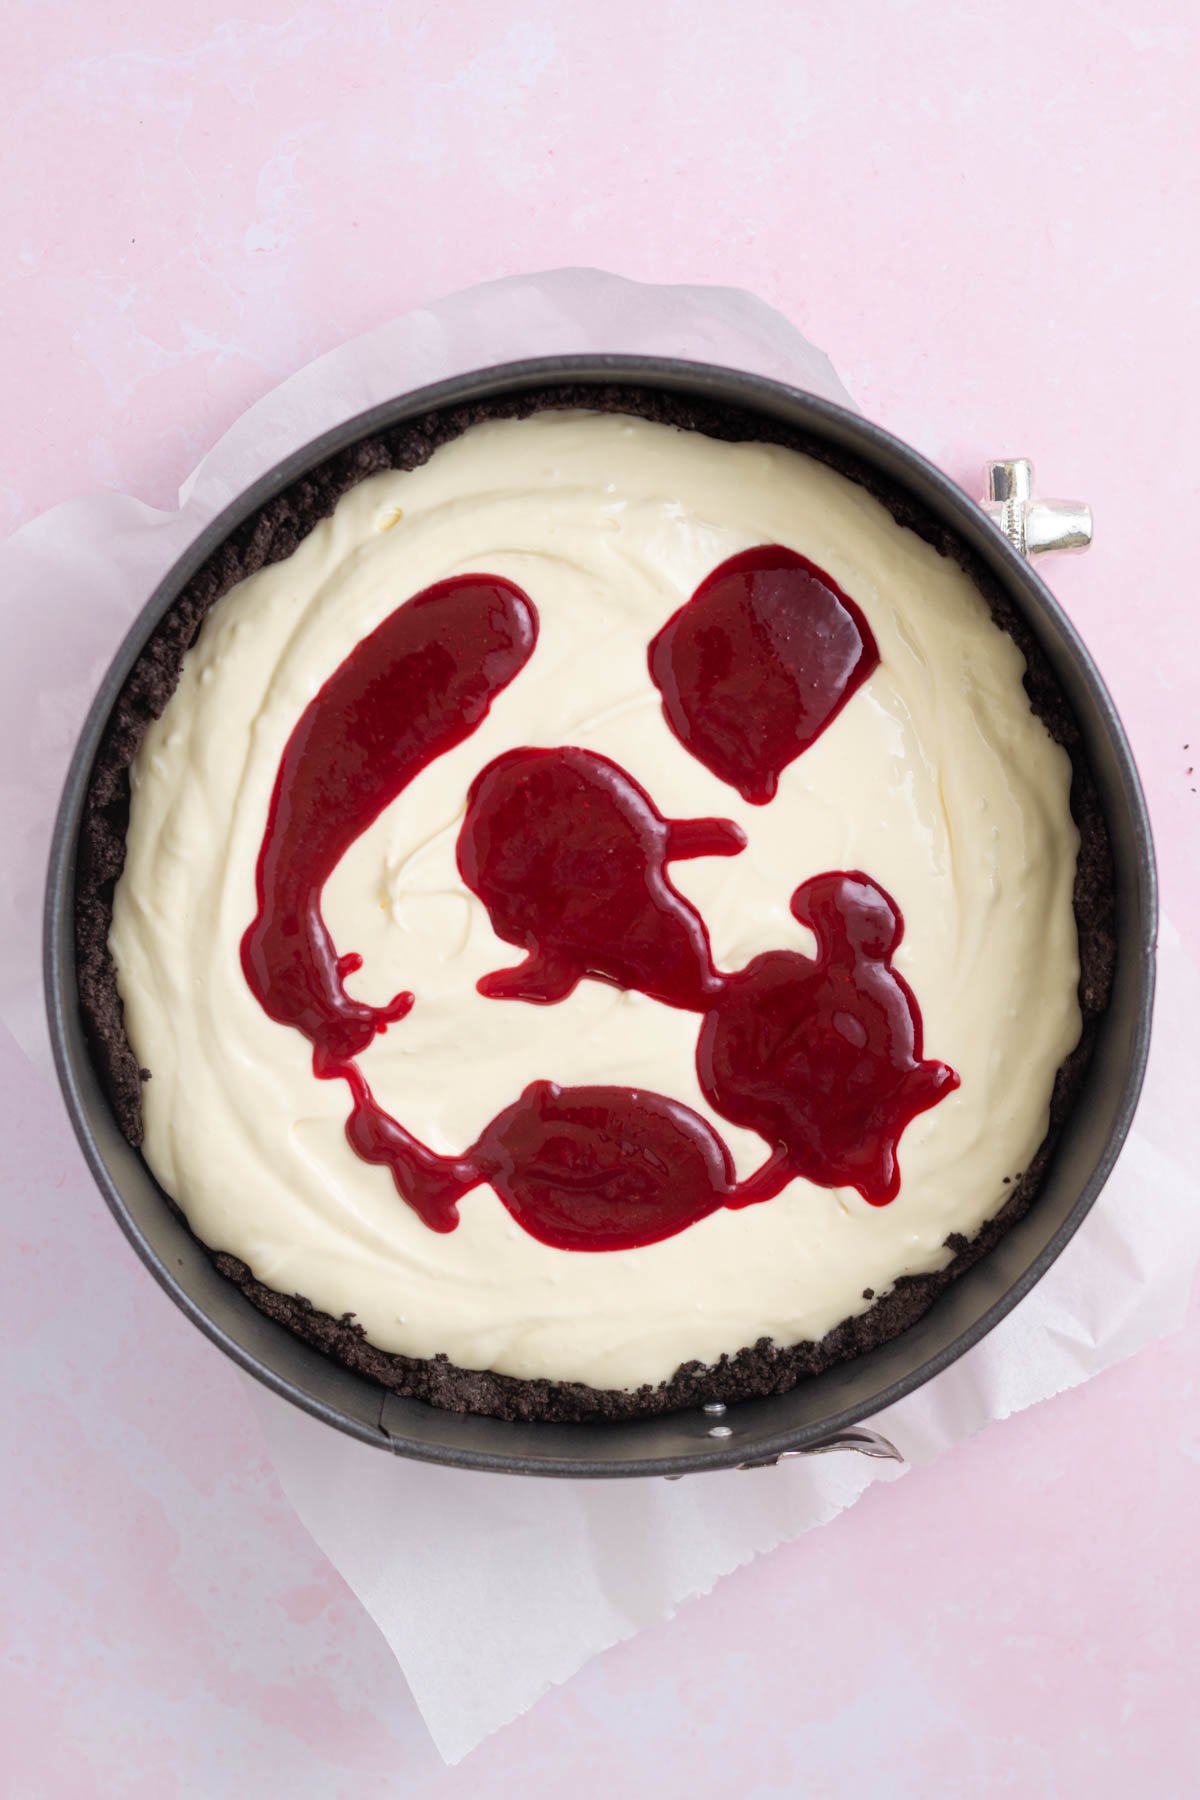 raspberry coulis over cheesecake batter